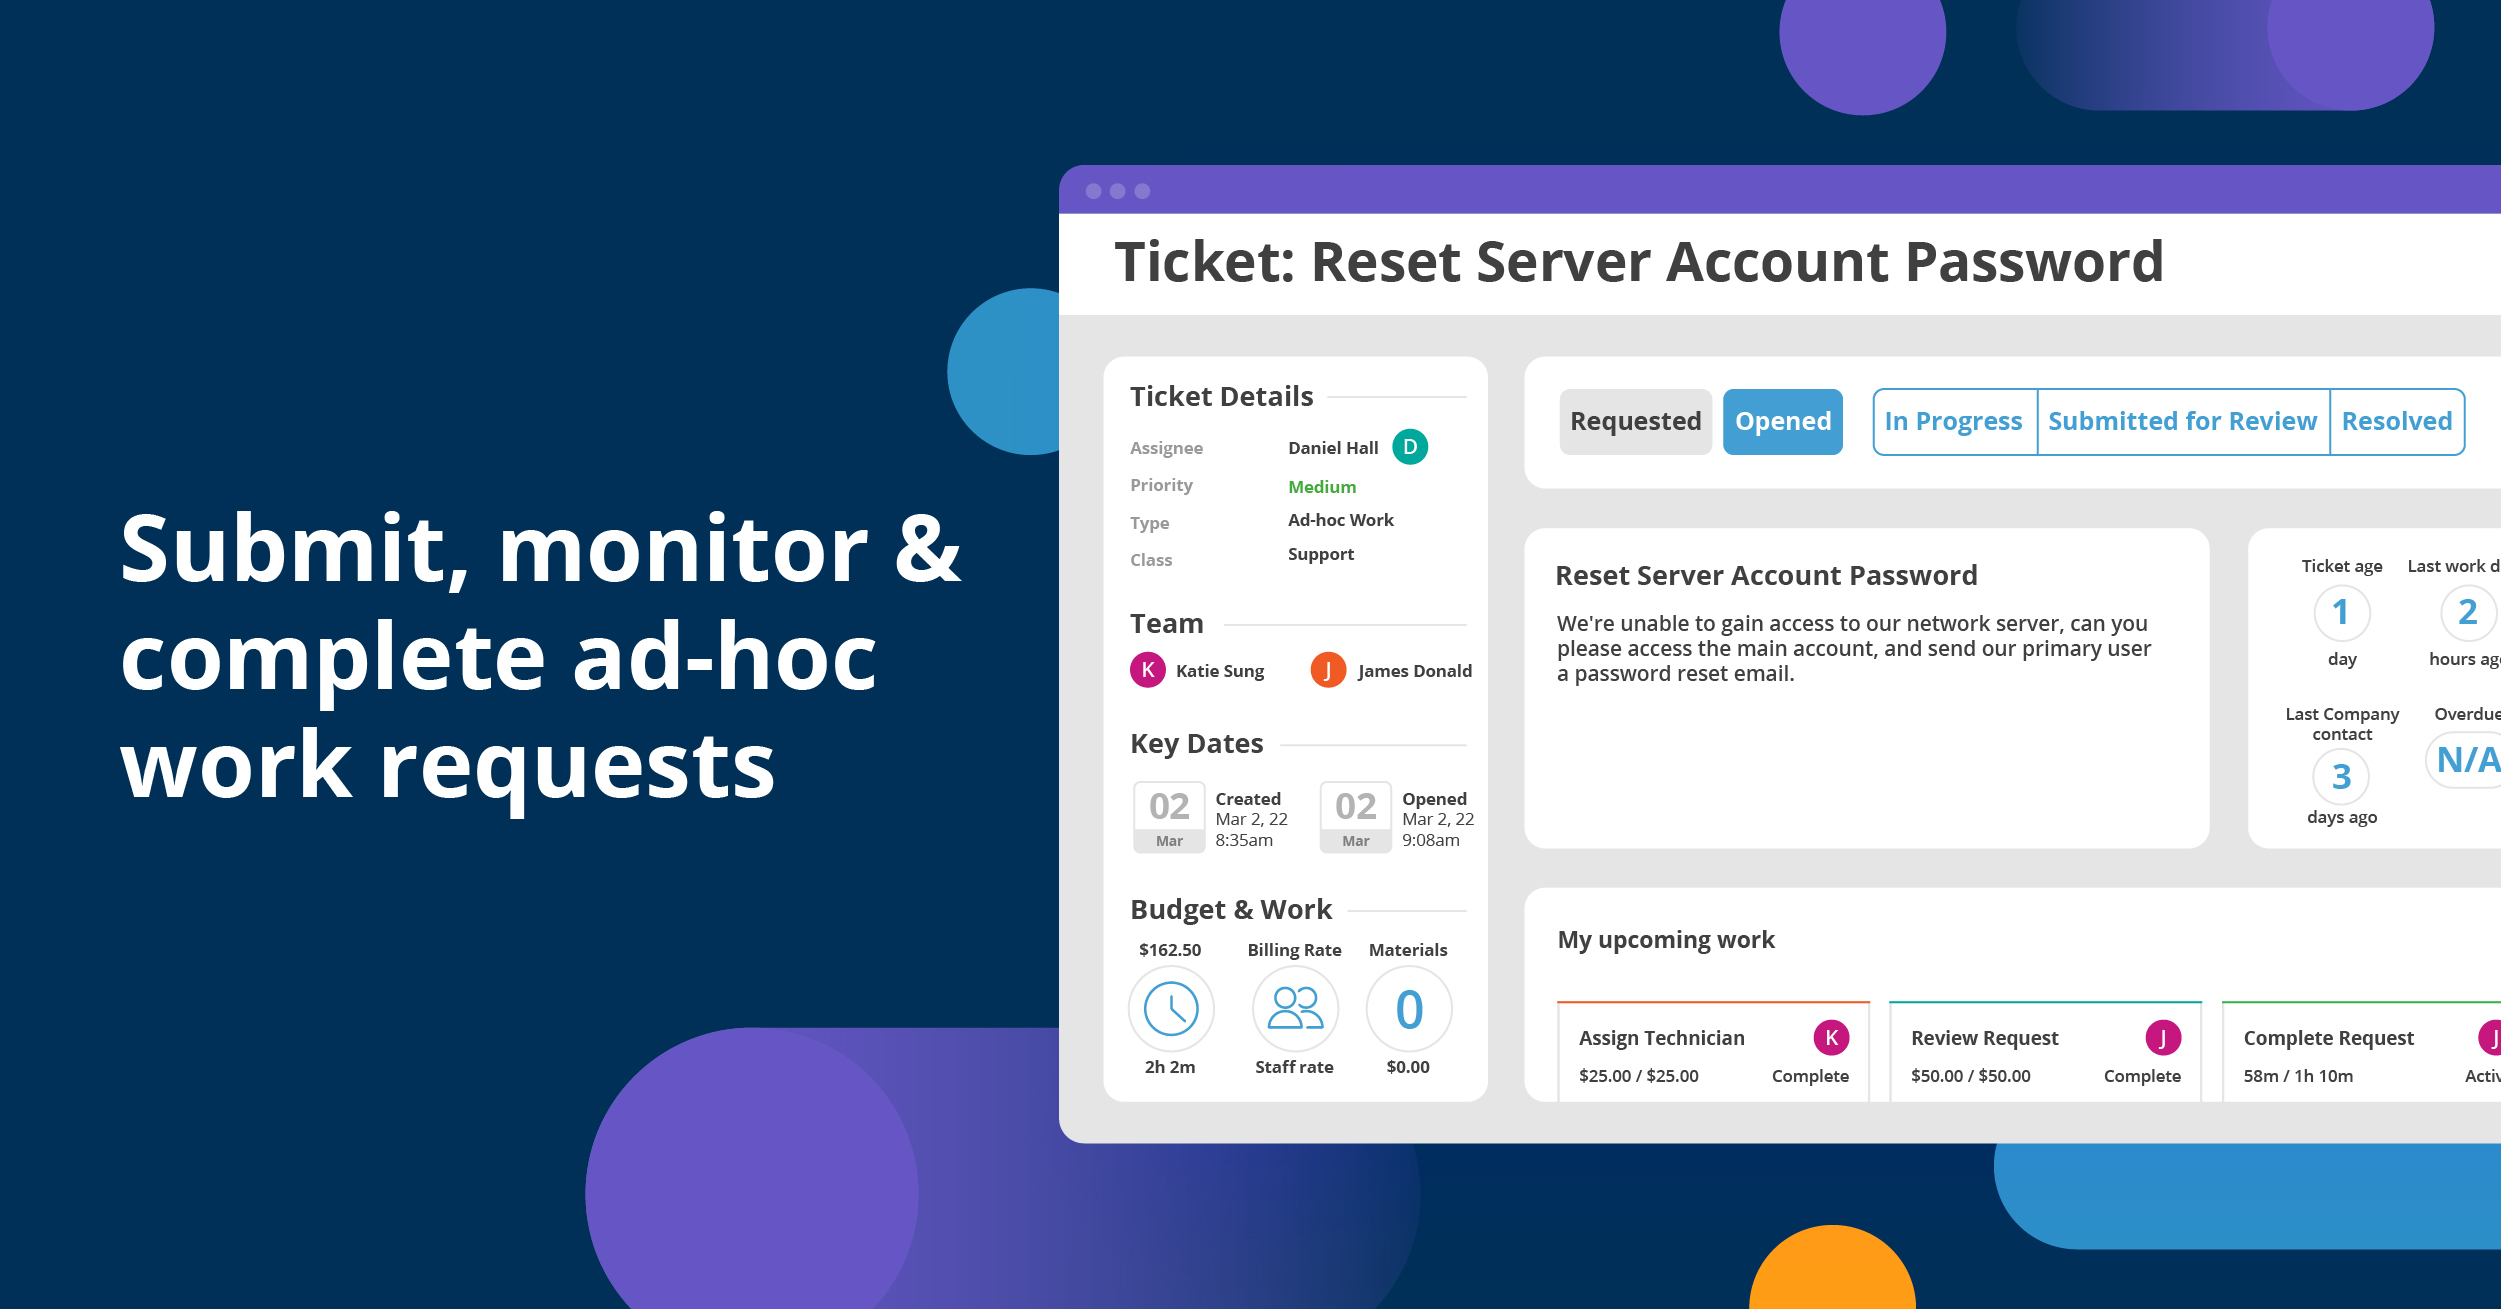 Tickets - Submit, monitor & complete ad-hoc work requests